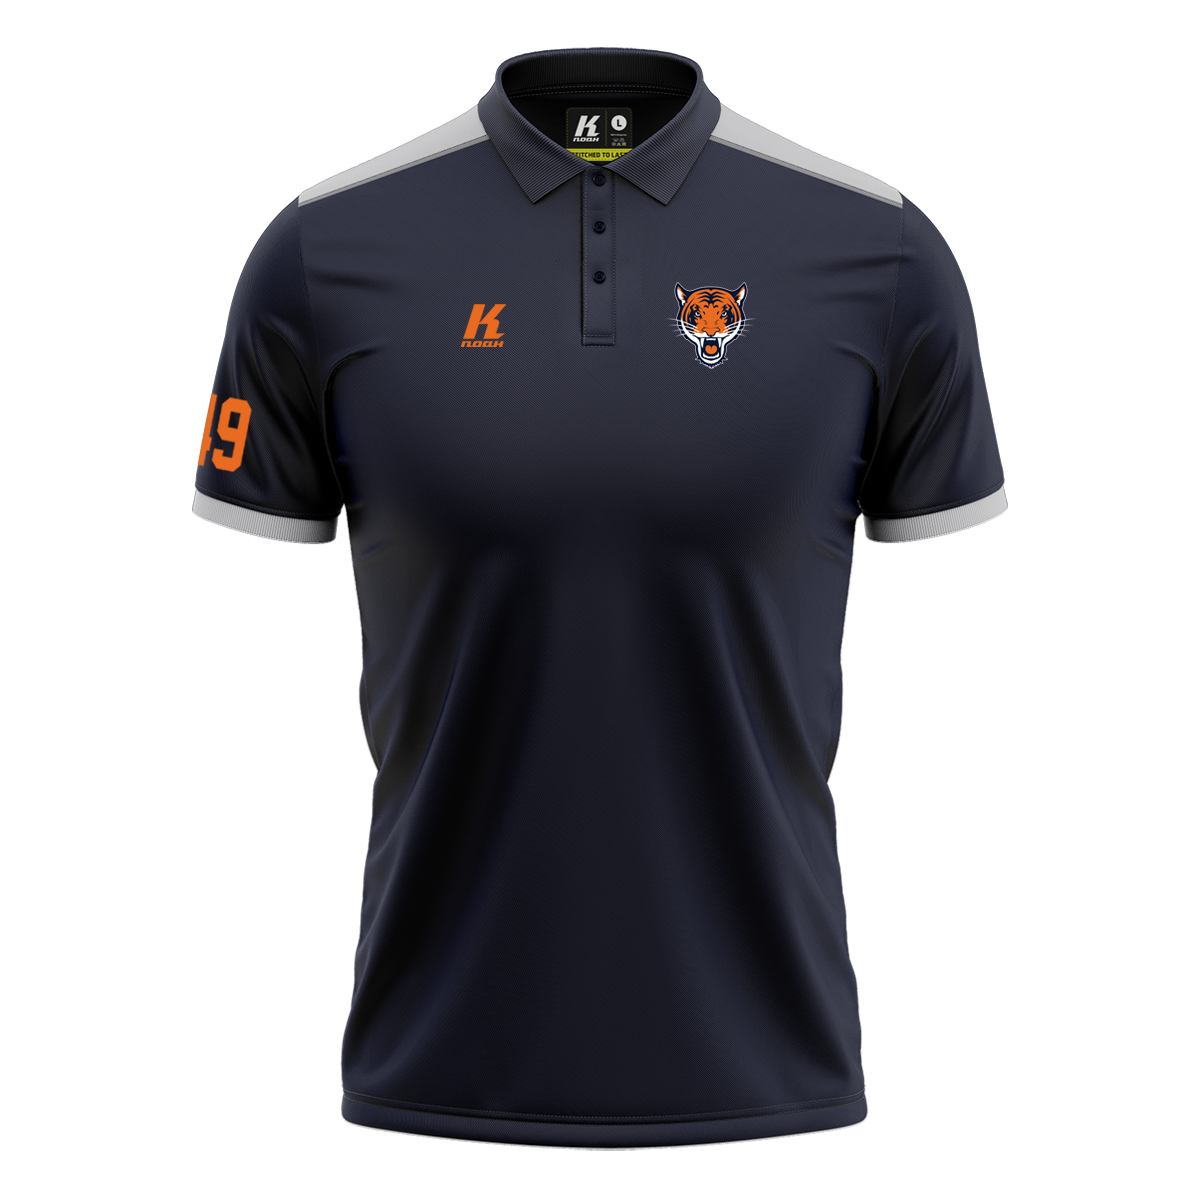 Tigers K.Tech-Fiber Polo “Heritage” with Playernumber/Initials